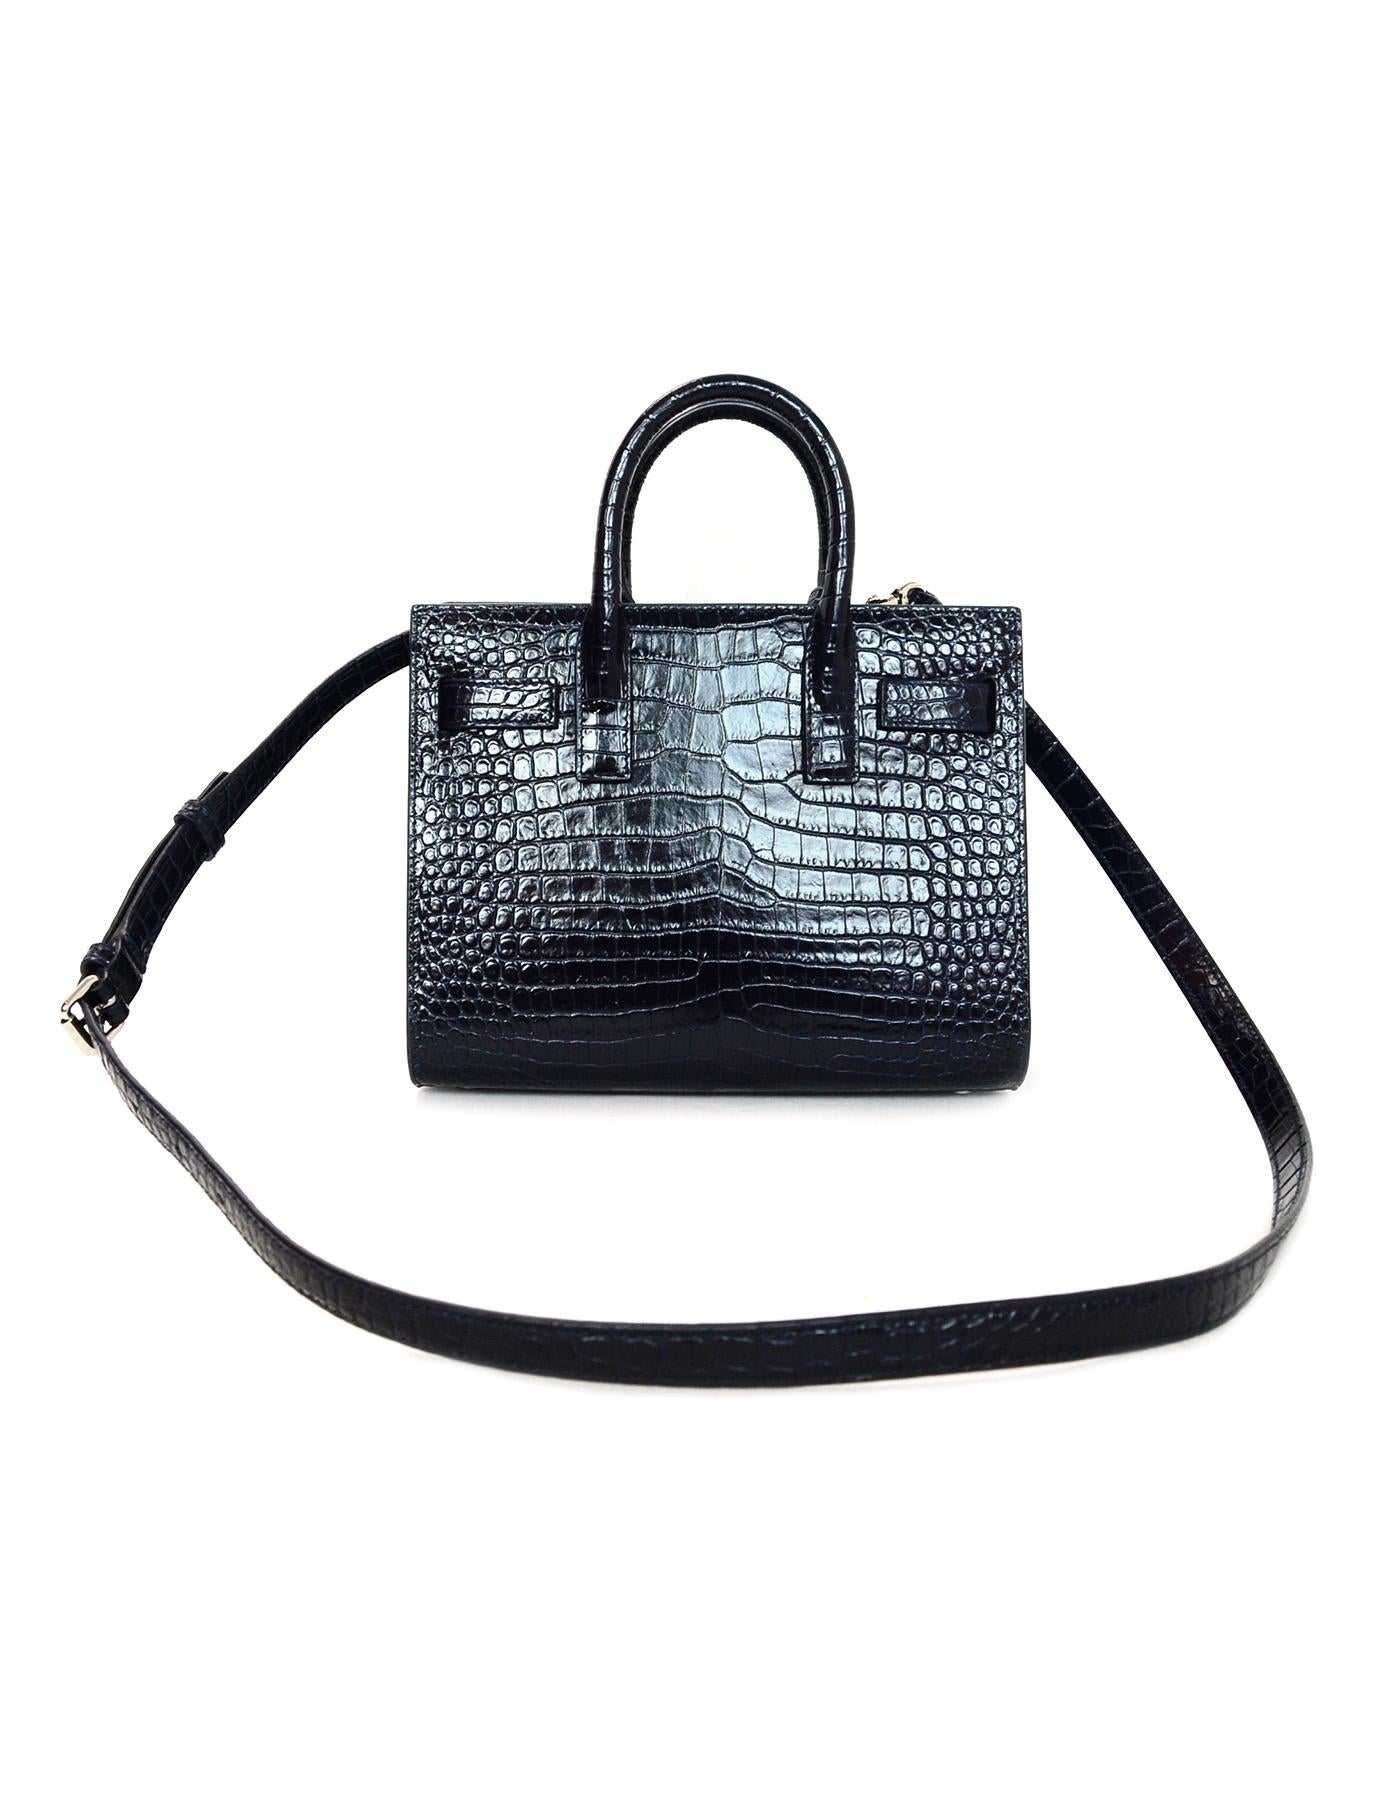 Saint Laurent Midnight Blue Nano Sac De Jour
Features embossed glazed leather to create a crocodile skin effect throughout. Detachable shoulder/crossbody strap

Made In: Italy
Color: Midnight blue- very dark blue, close to black in